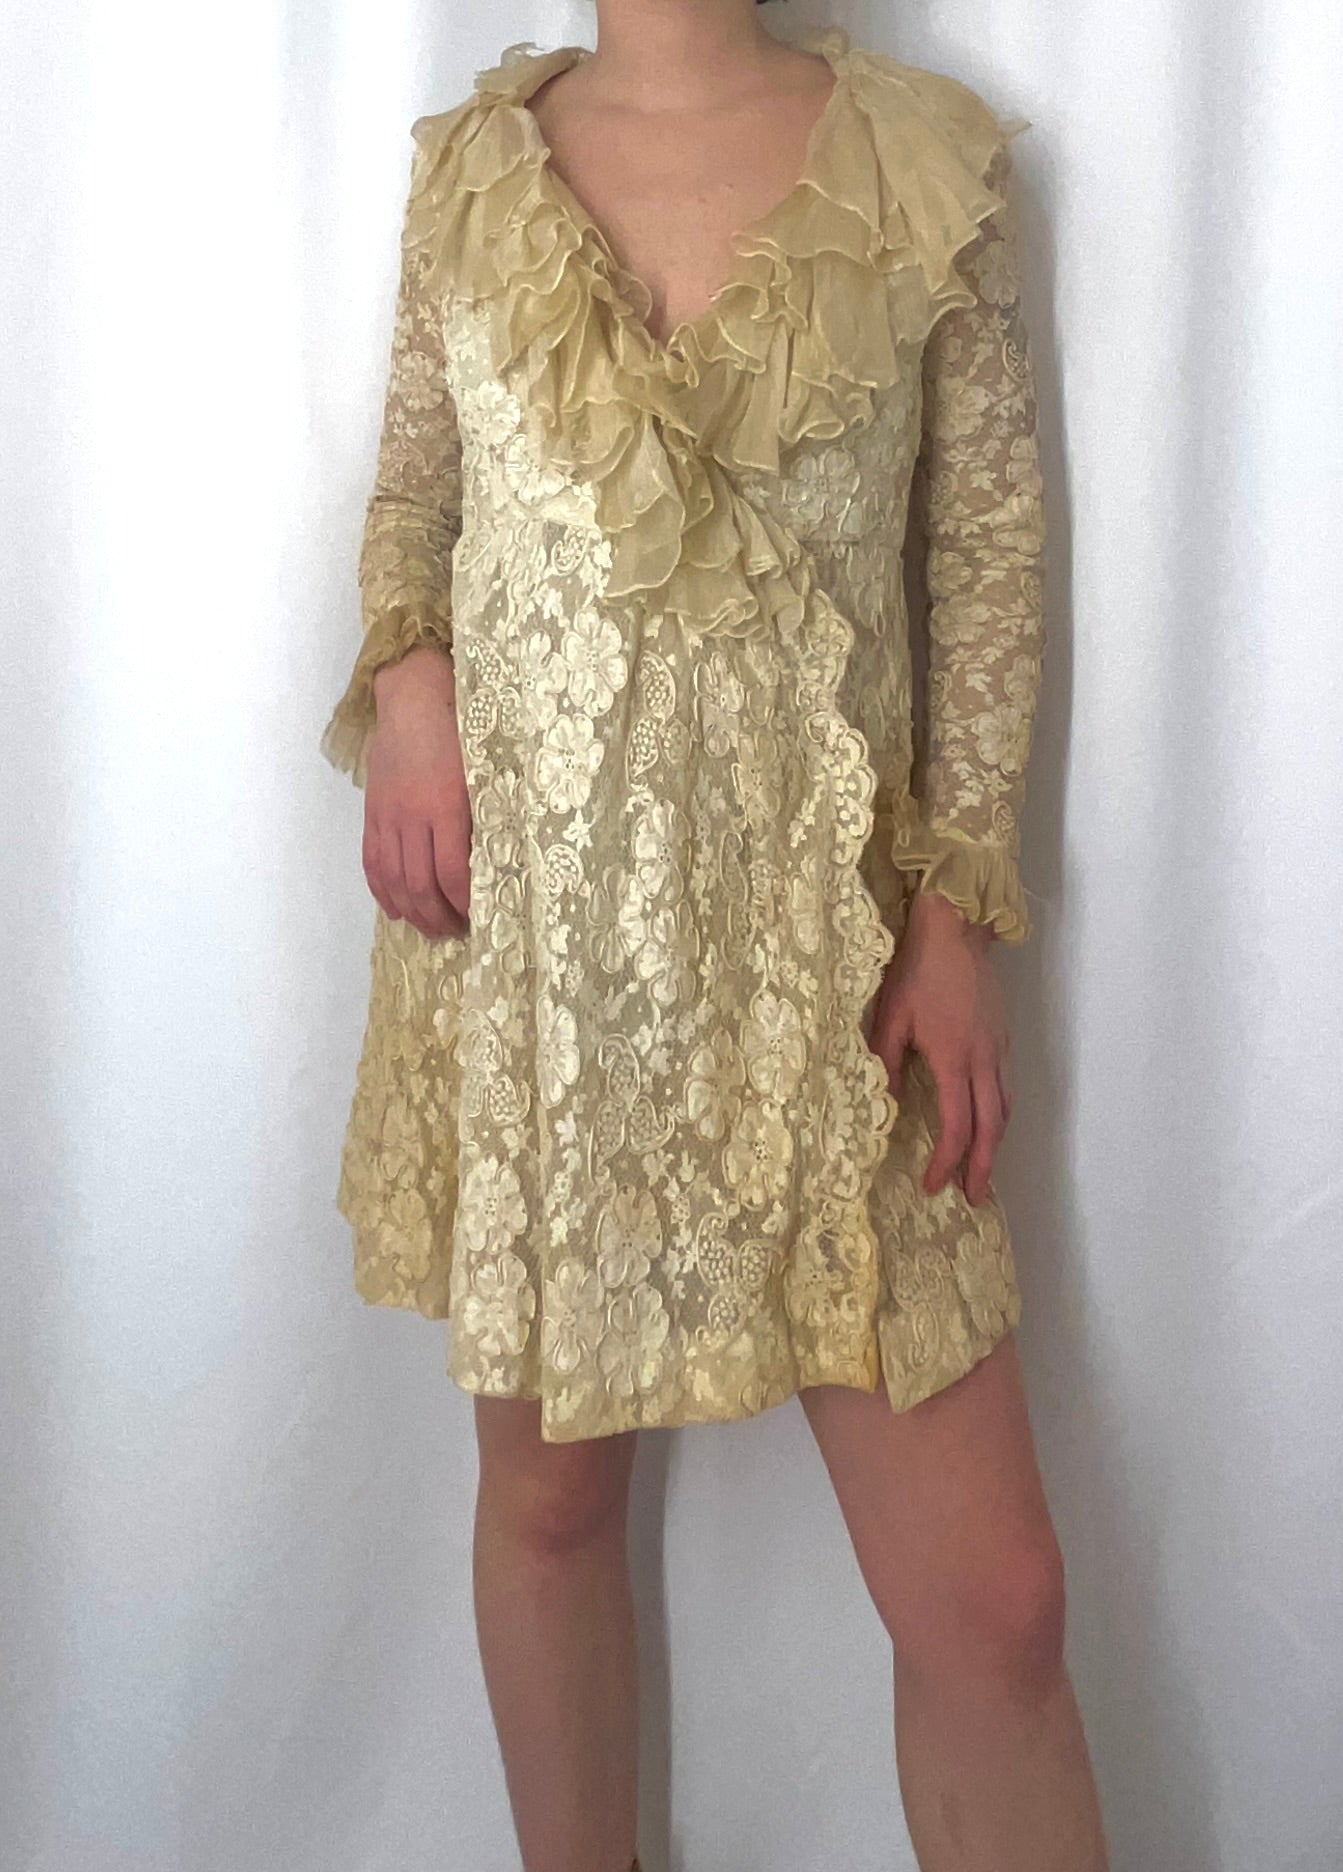 Vintage Chester Weinberg Off-White Lace and Ruffle Dress